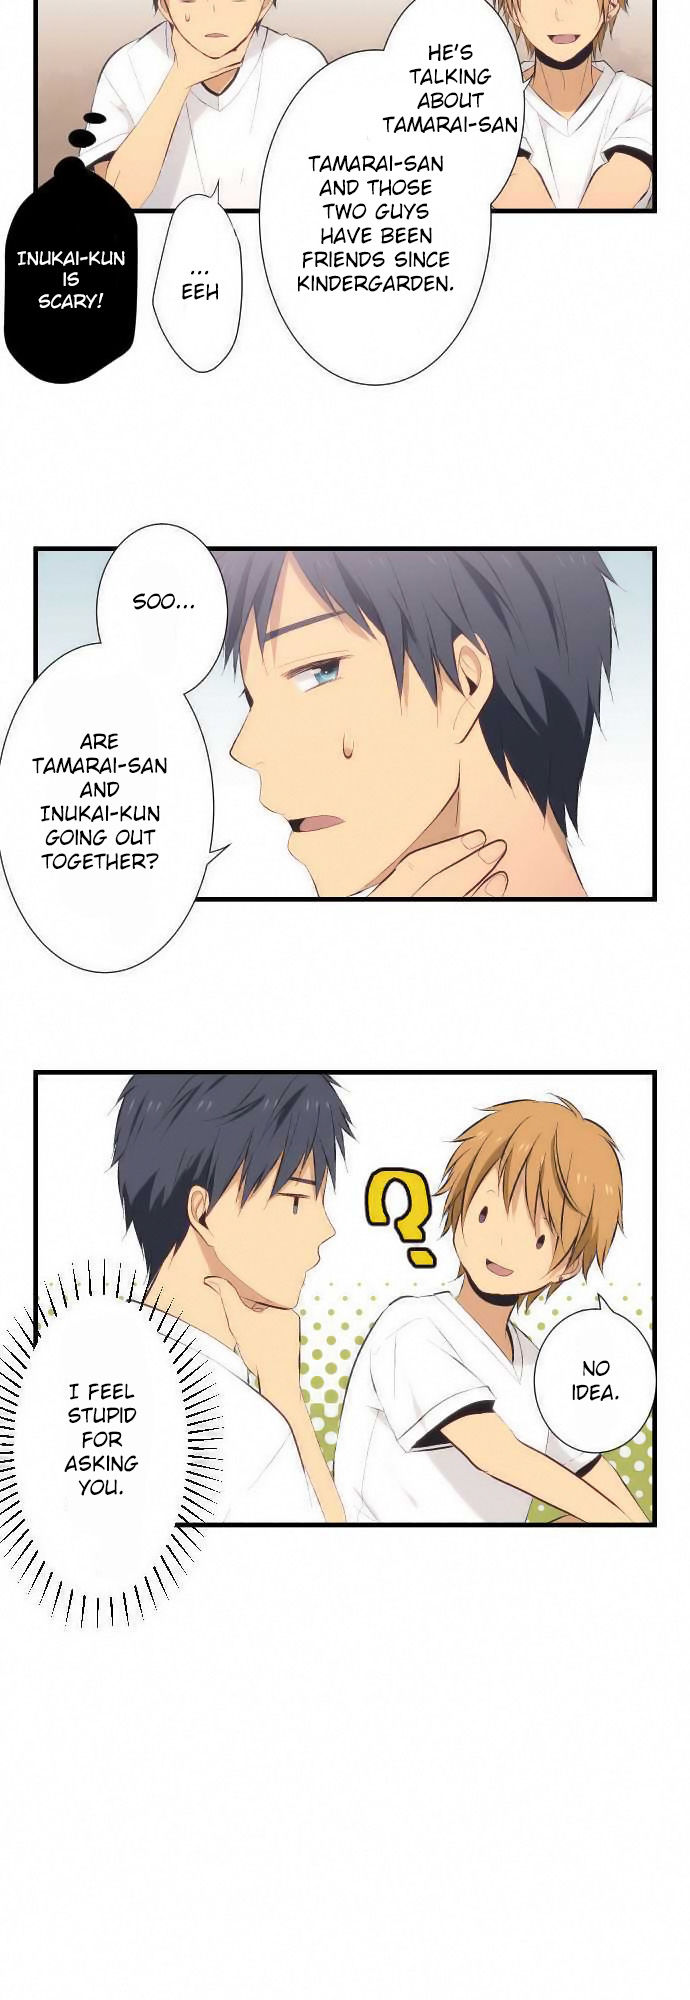 ReLIFE 29